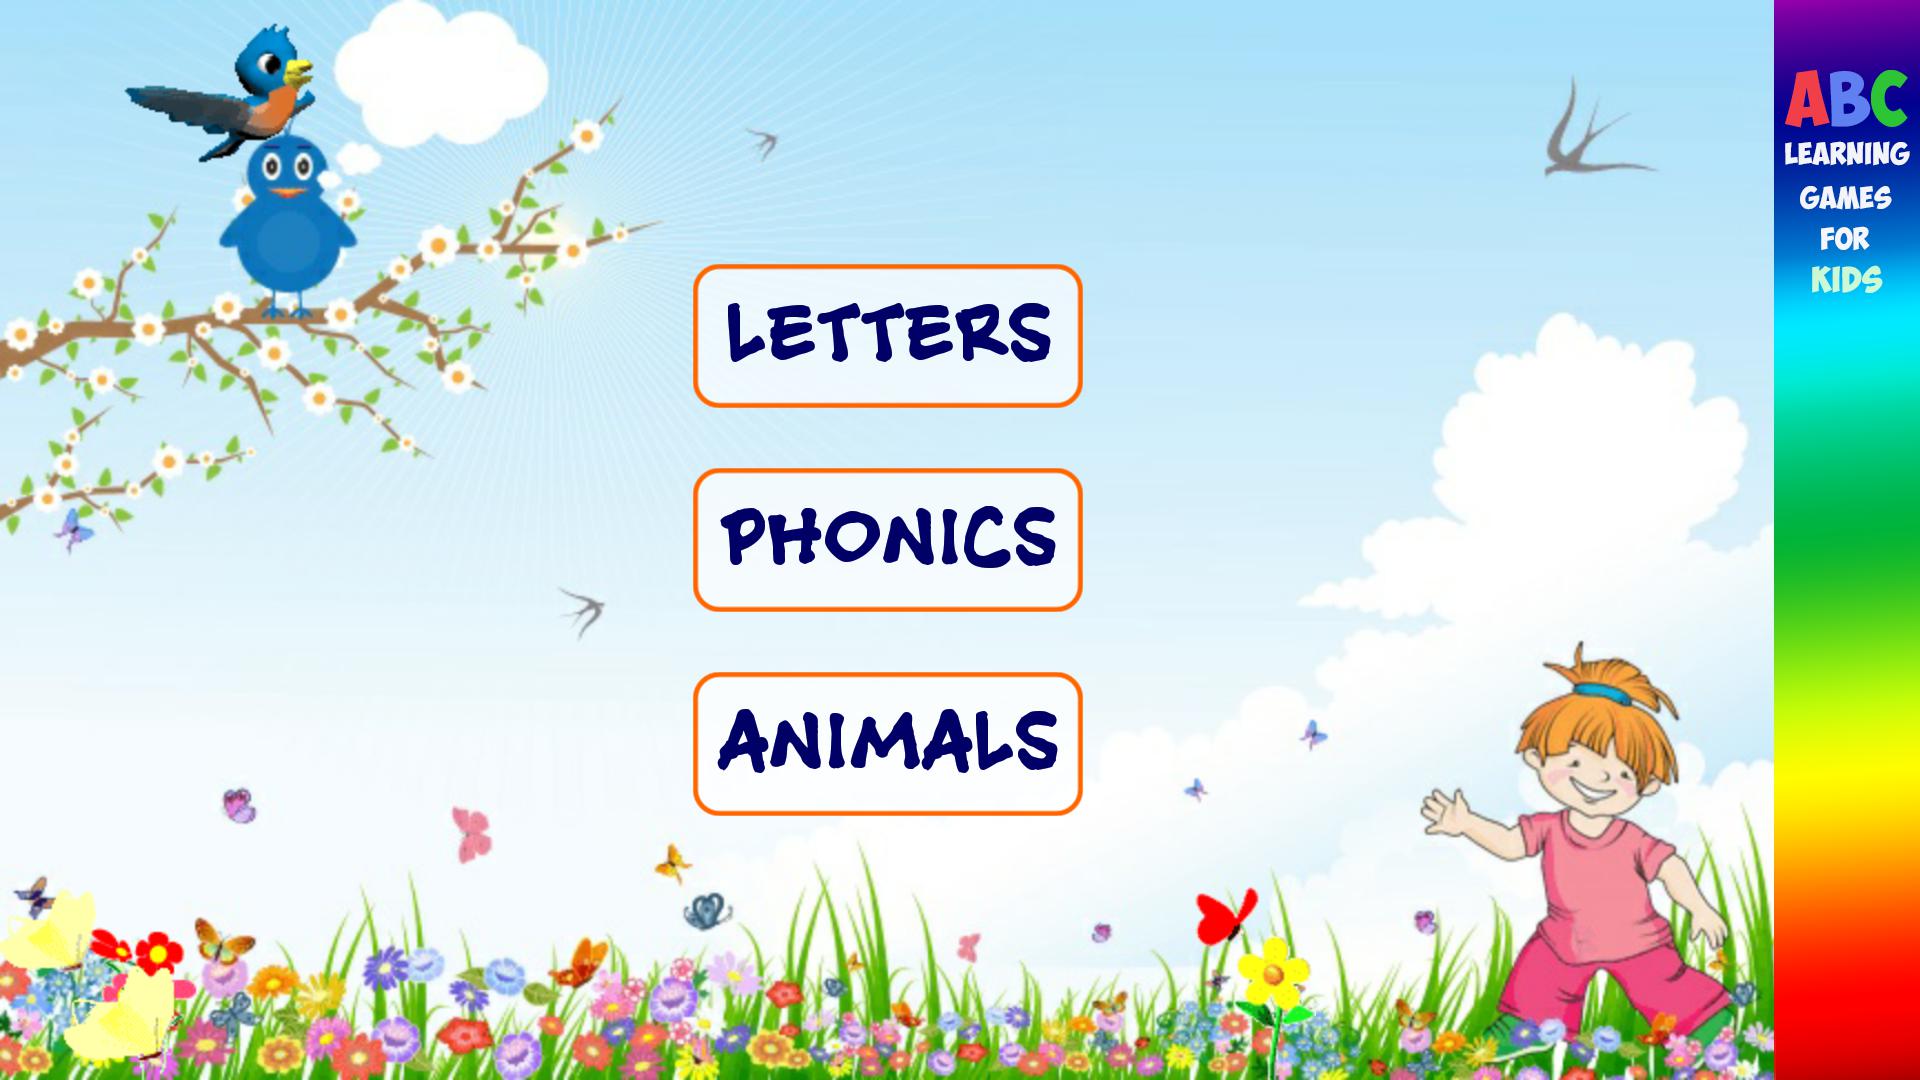 ABC Learning Games for Kids_游戏简介_图3